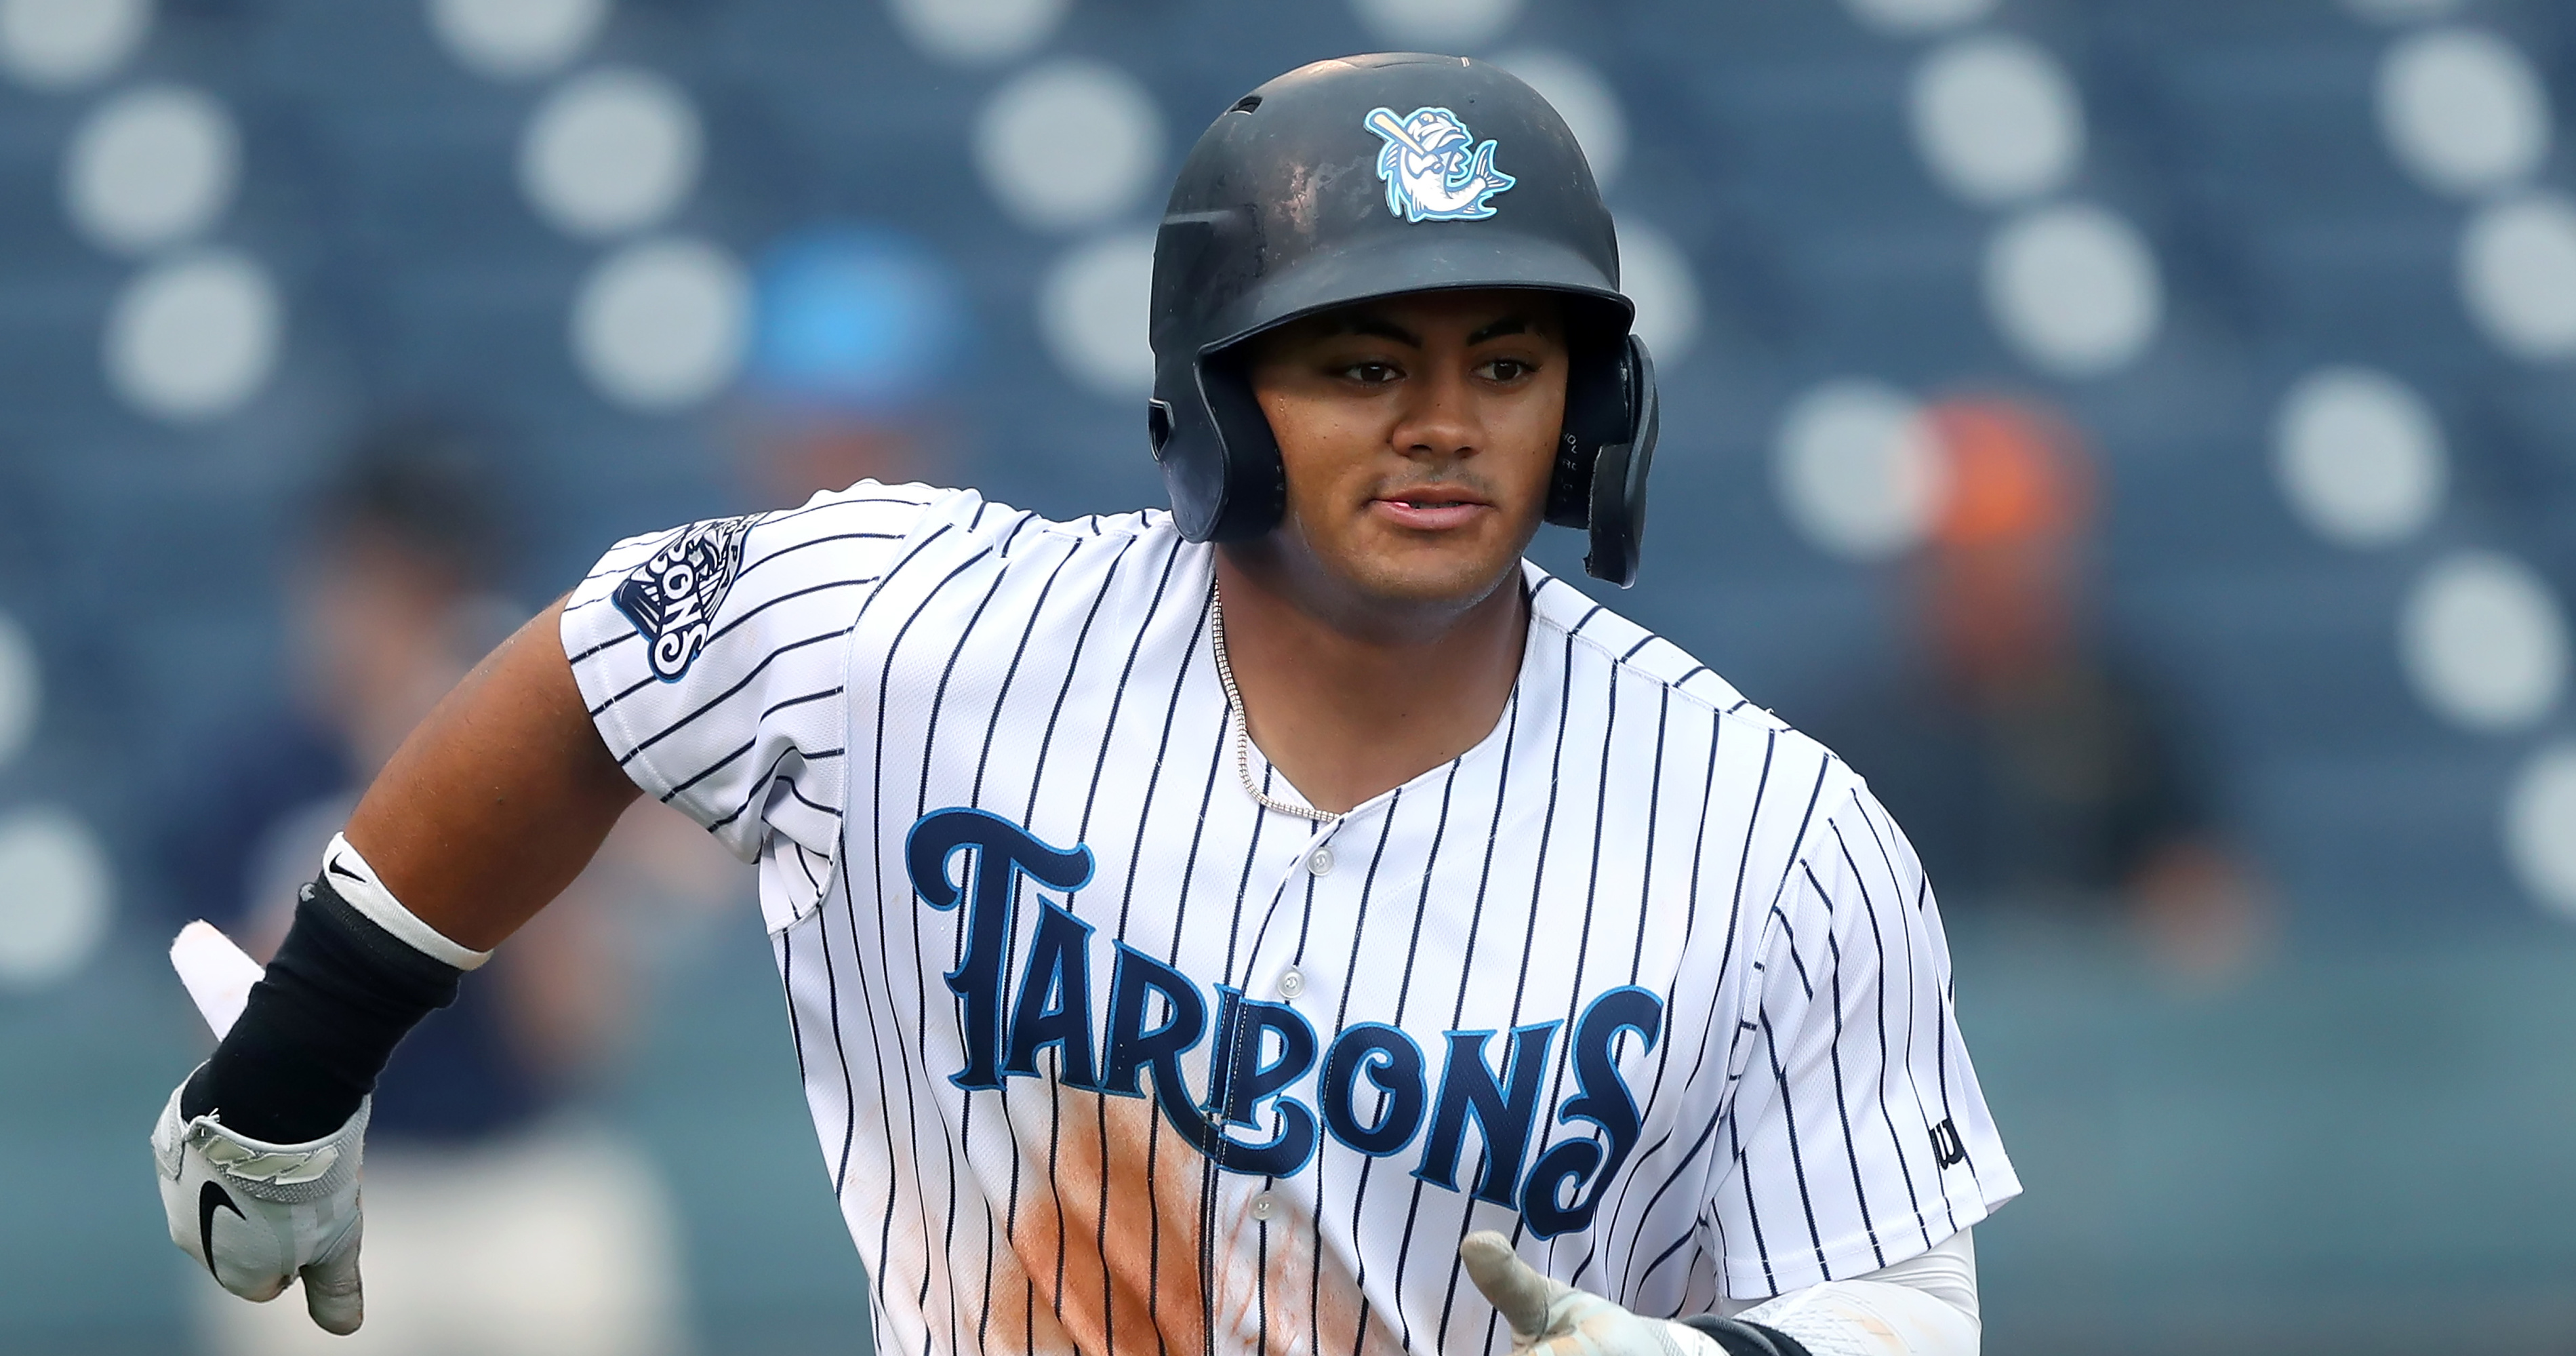 Examining the strengths and weaknesses of the Yankees' farm system